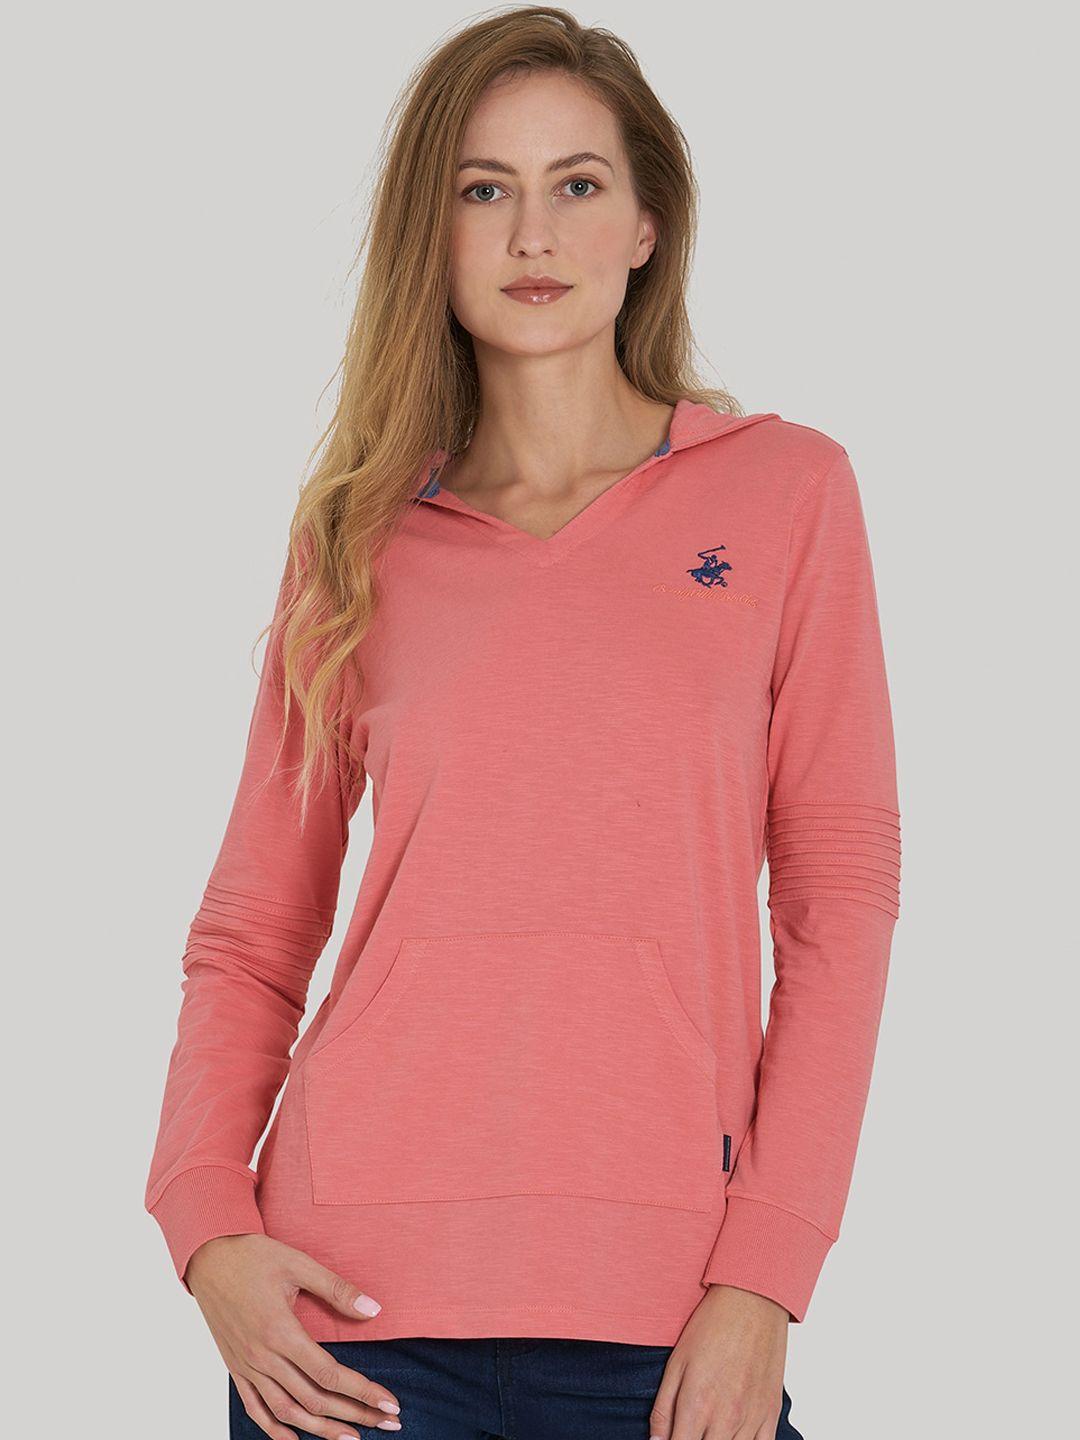 beverly hills polo club women pink solid hood t-shirt